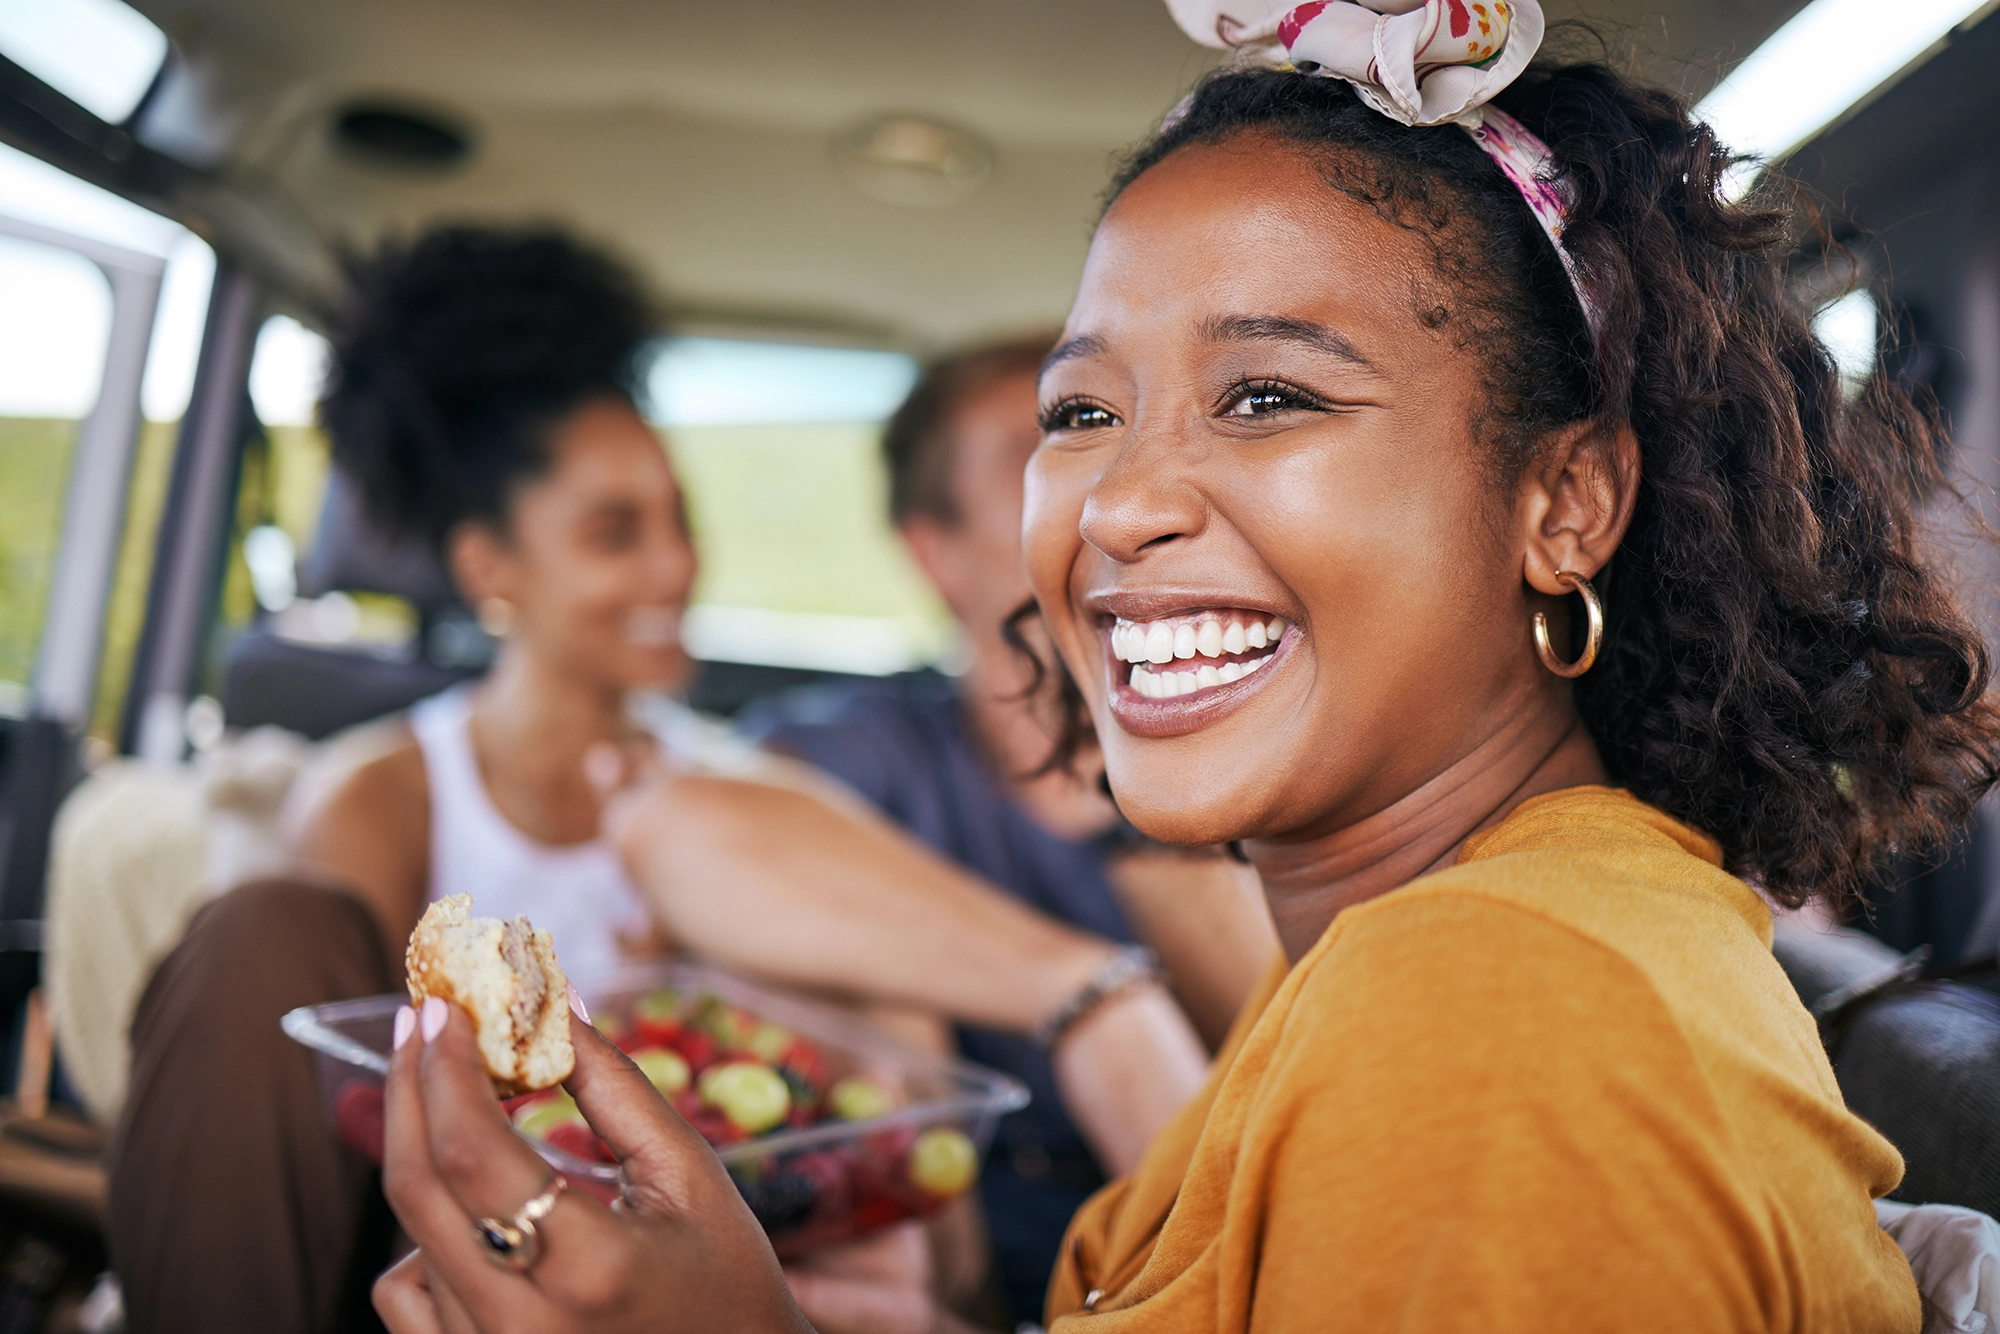 A woman wearing a yellow top sits in a car with friends, smiling and holding a piece of fruit.